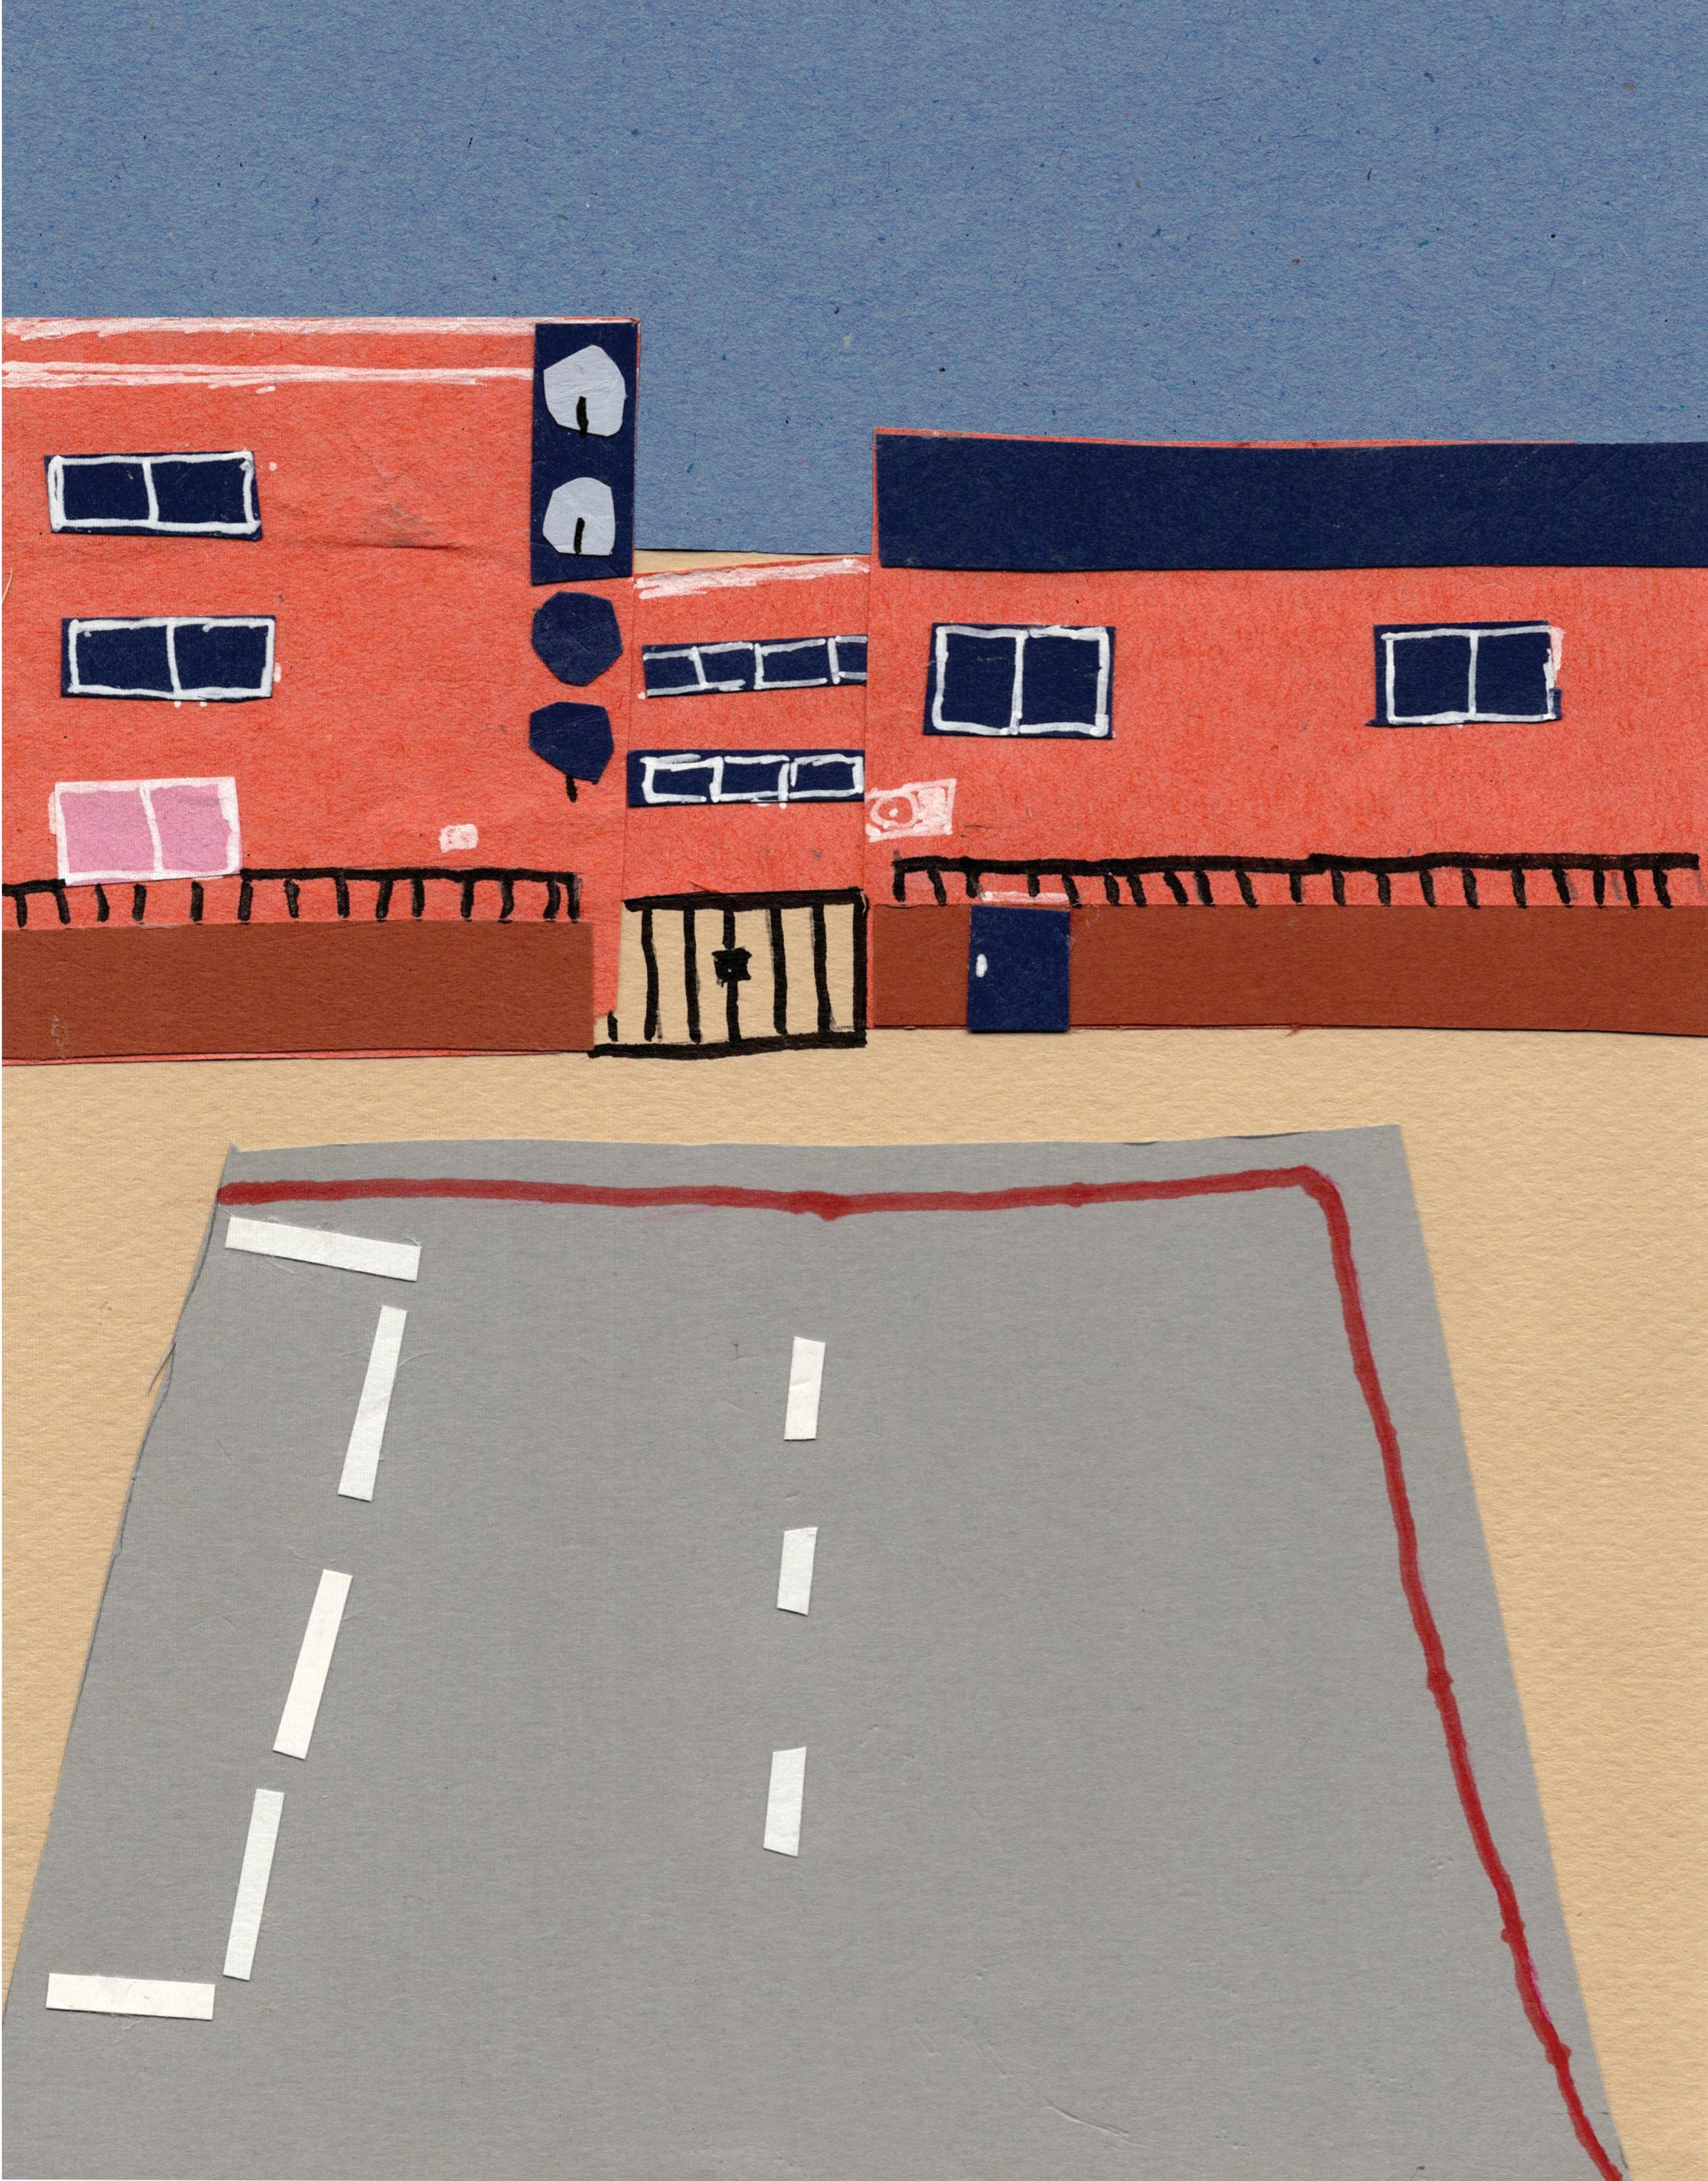 Illustration of a row of buildings behind a gate with a carpark in front